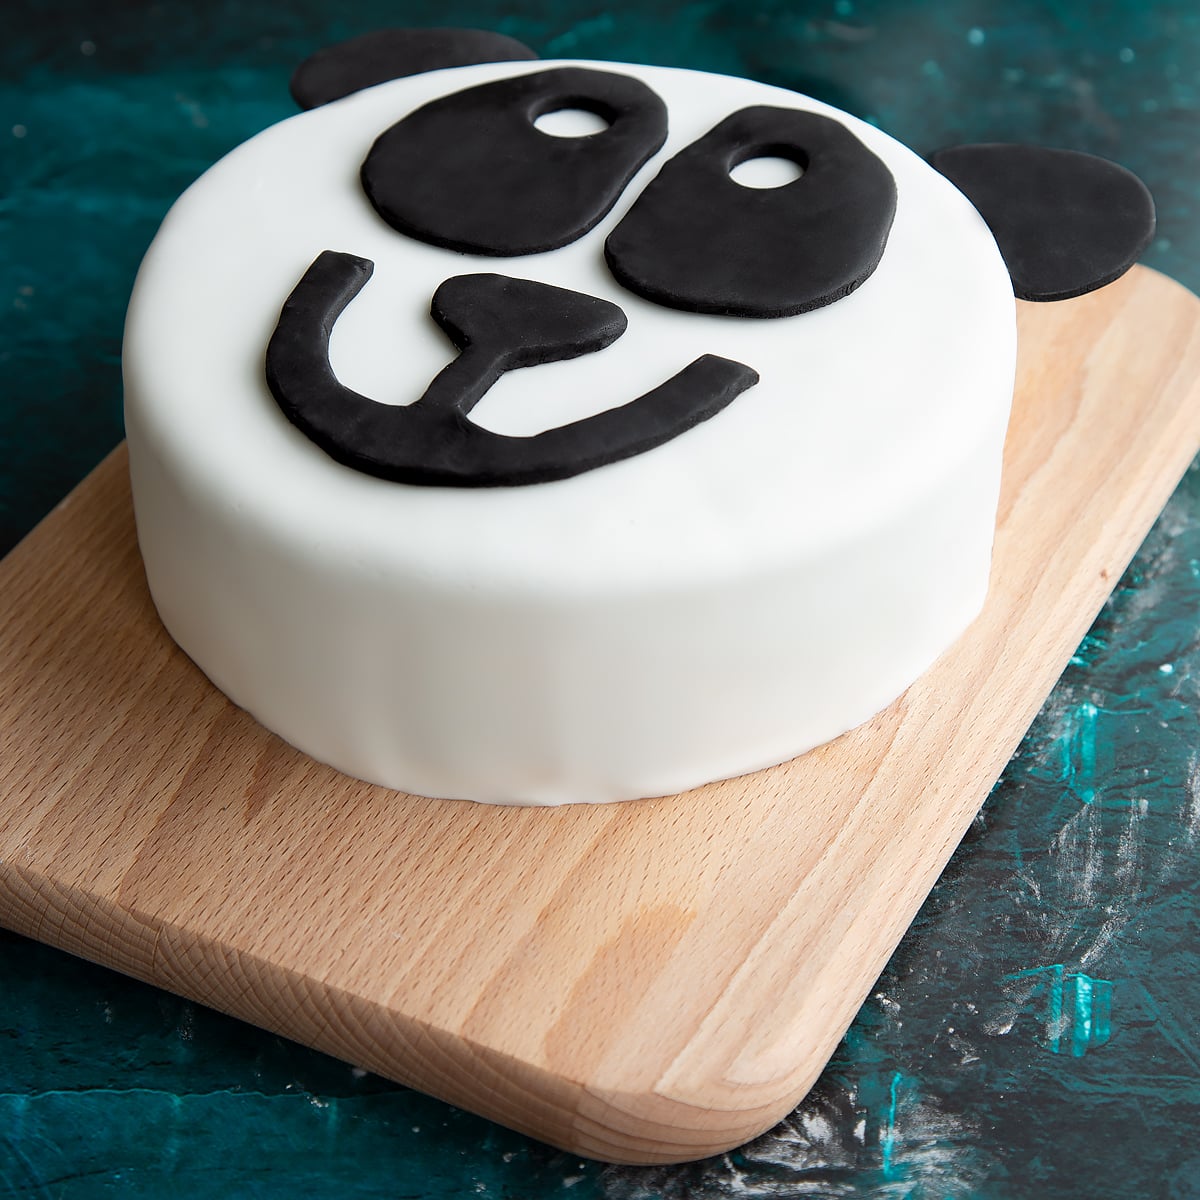 3D Panda Cake Recipe | Stey-by-Step Guide - TheFoodXP